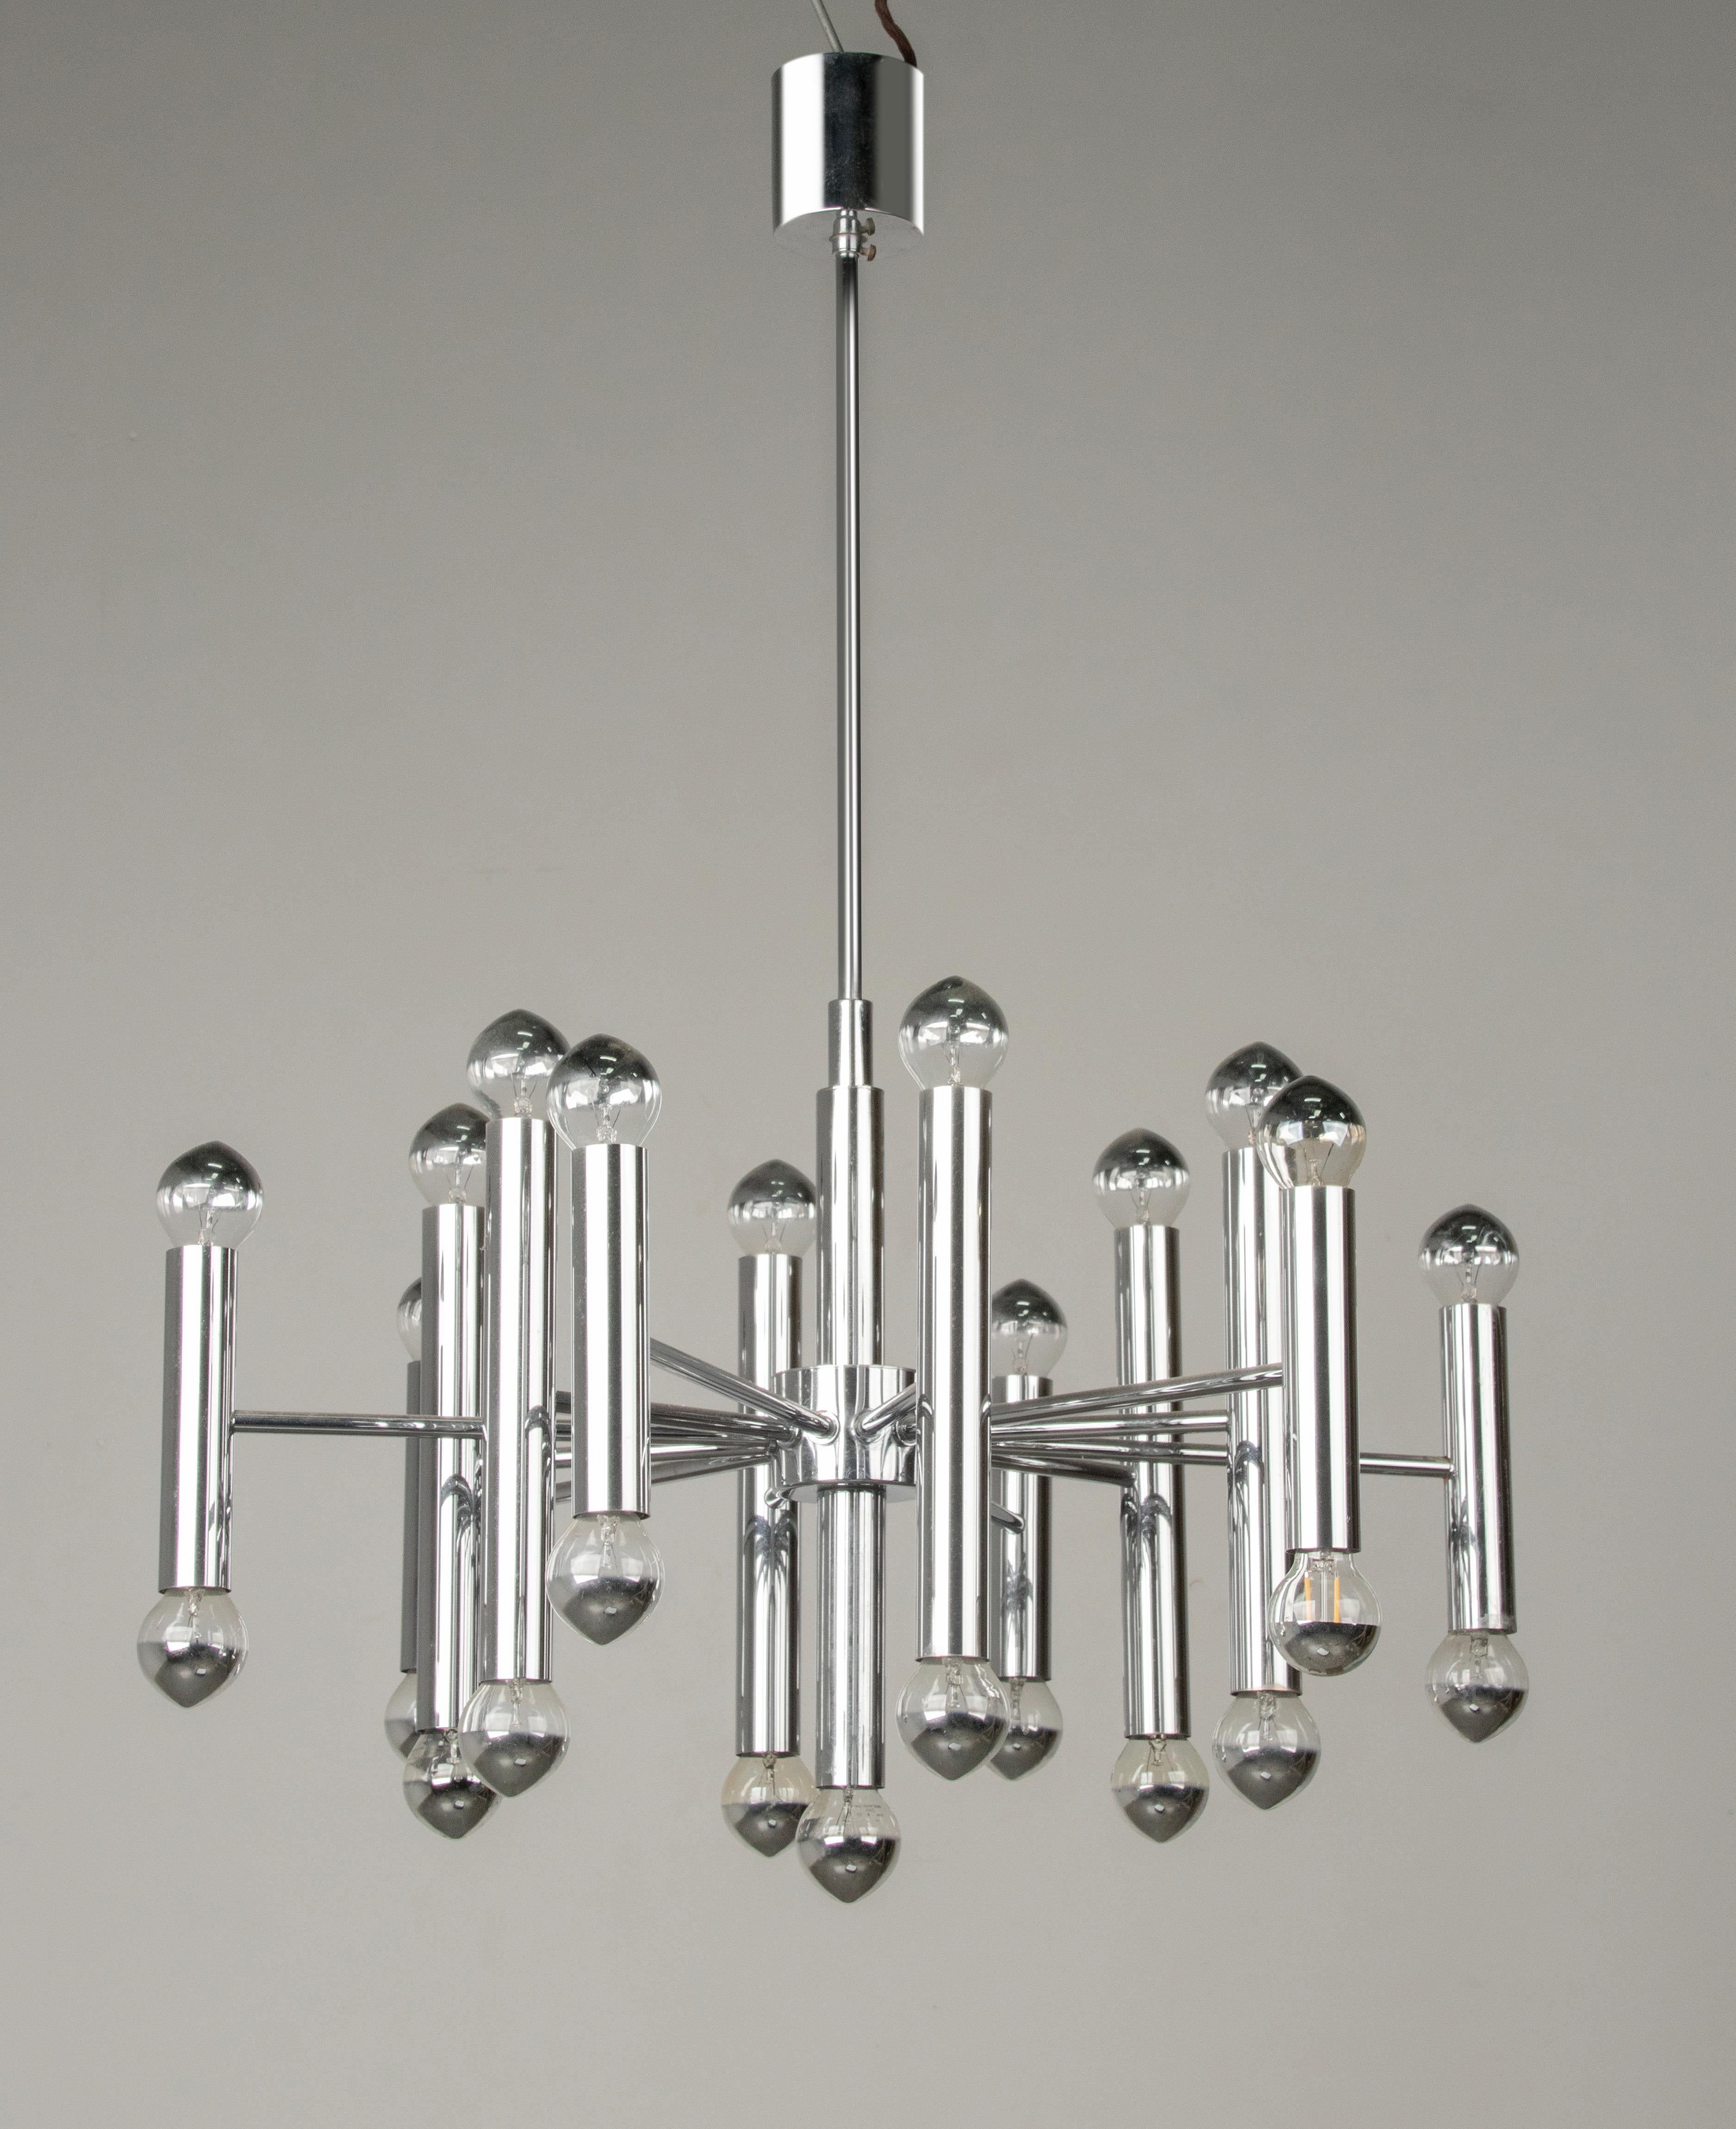 A styish mid-century tubular chandelier, designed by Gaetano Sciolari. The lamp is made of chrome plated metal. It has 12 arms, on each arm two lights, in total 24 lights.
The chandelier is fully working, suitable for 220-240 V. The chrome plating